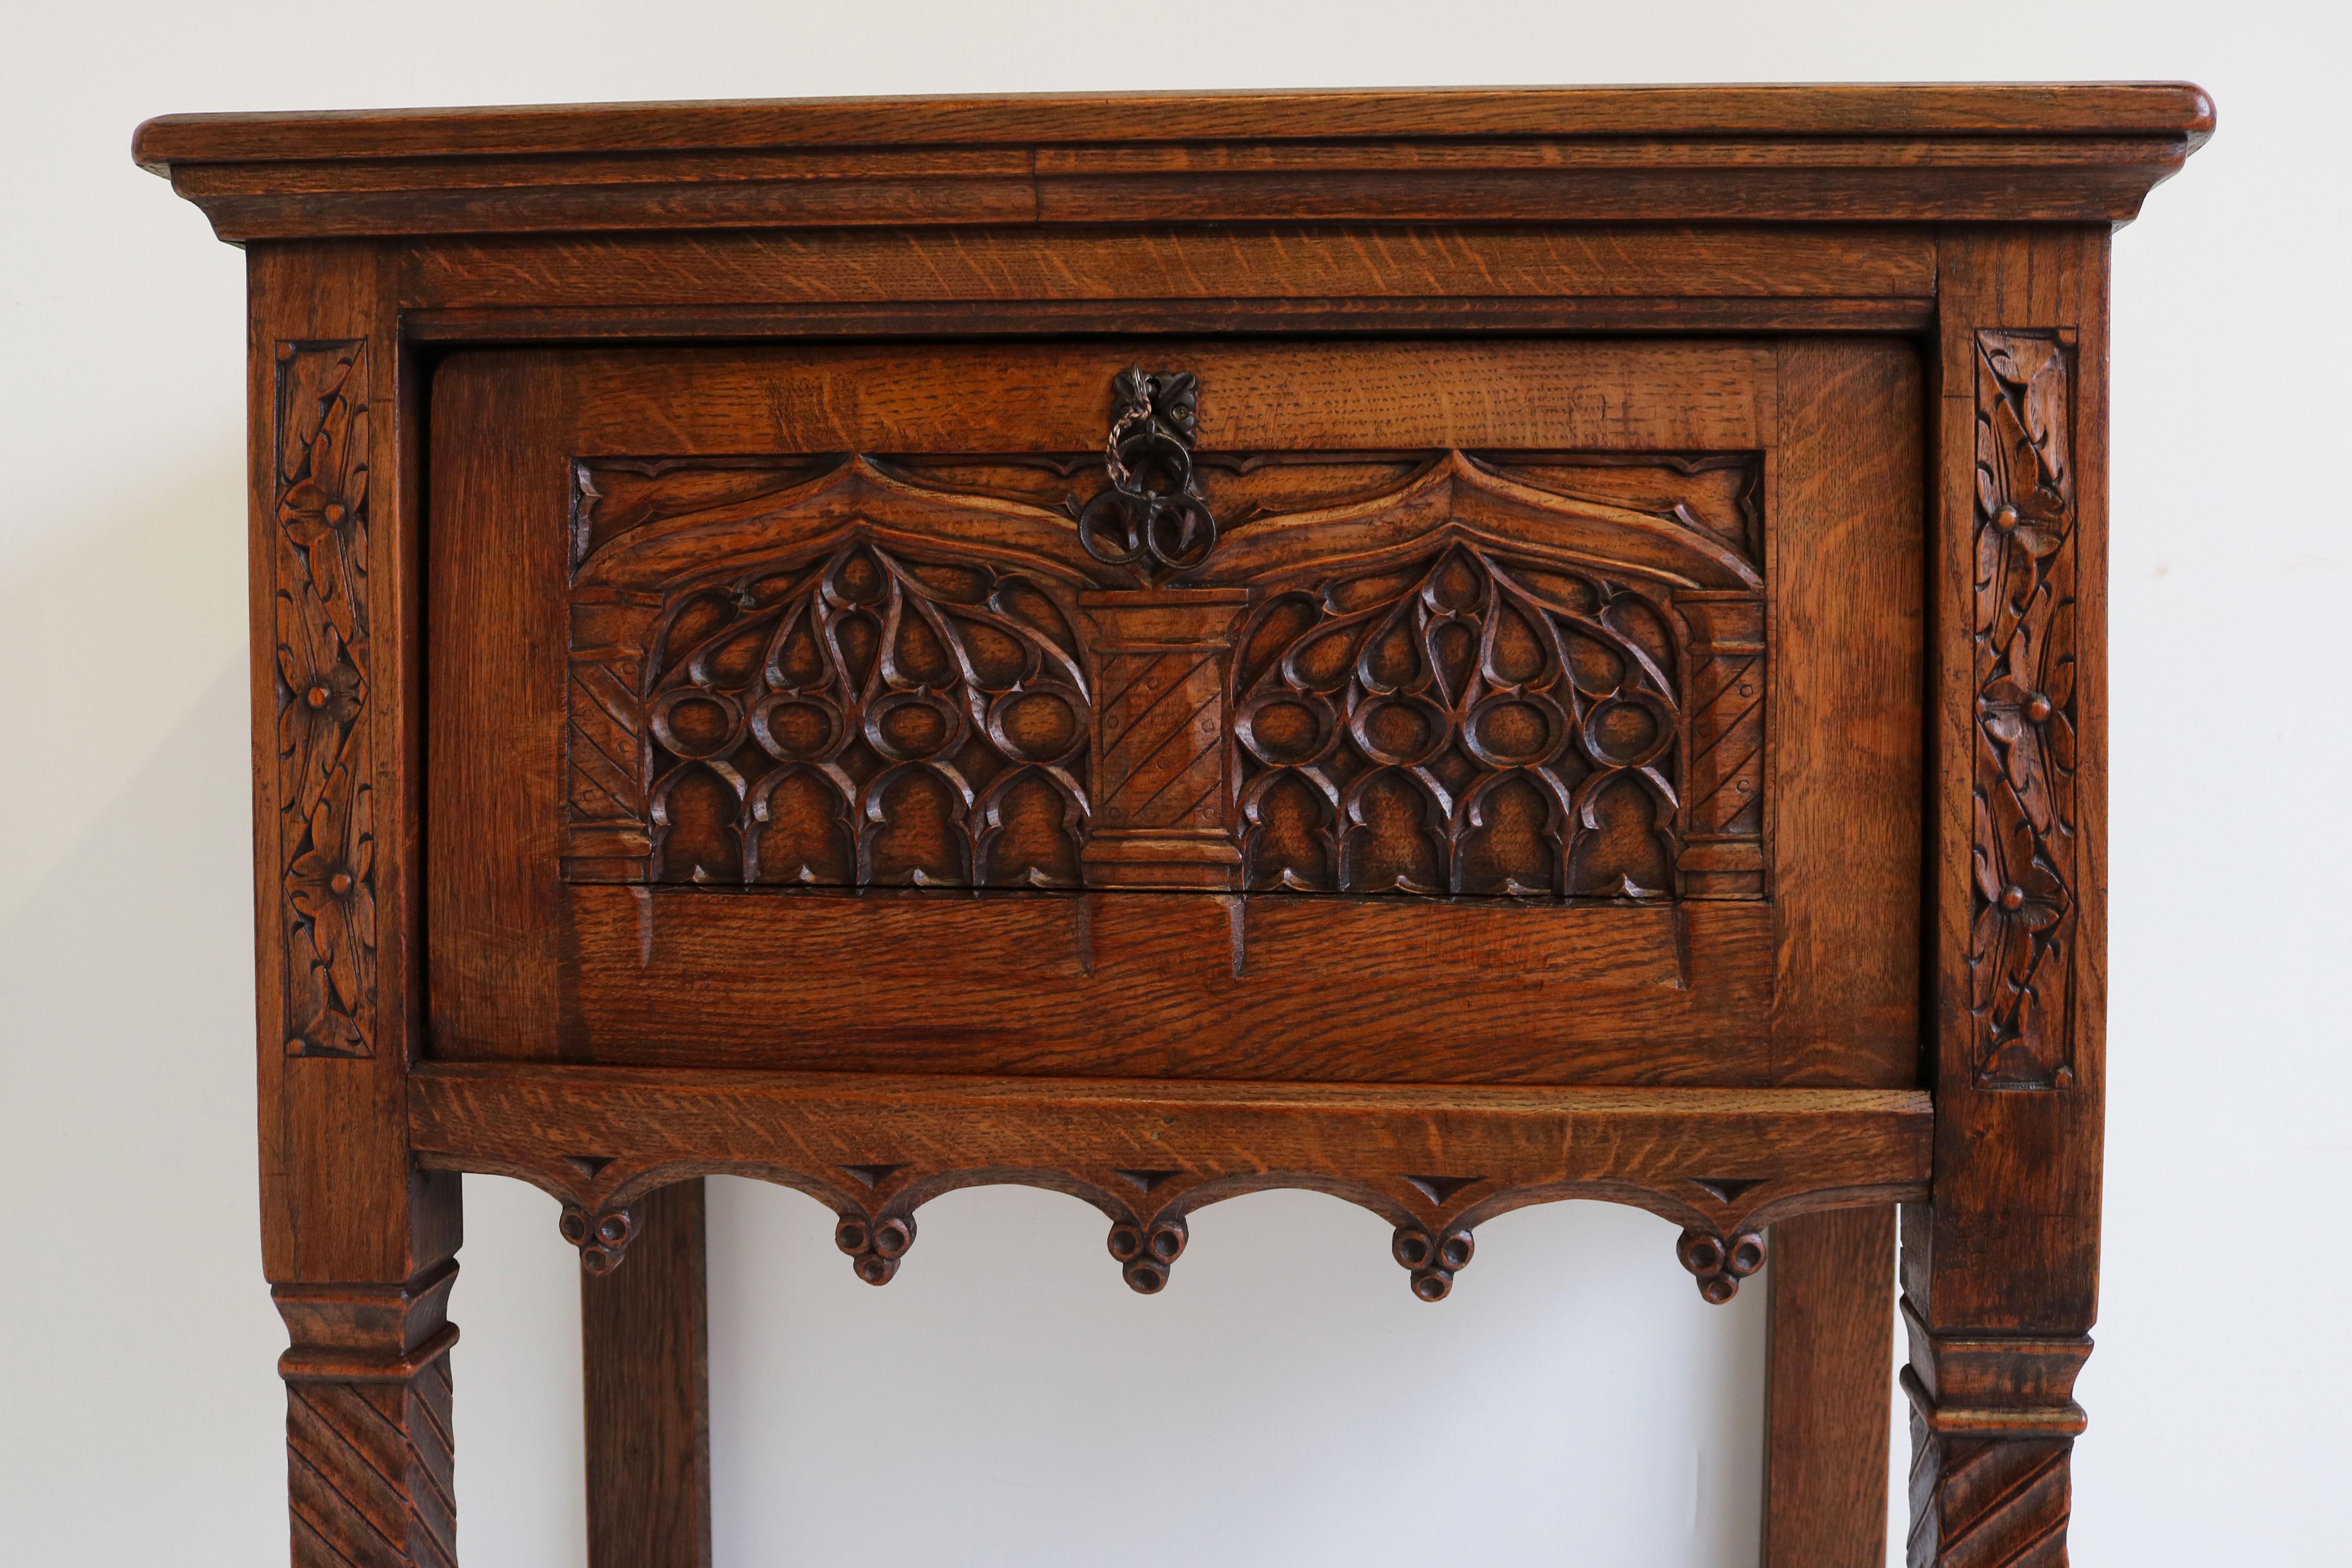 Marvelous & rare ! This Gothic Revival dry bar / drinks cabinet in European oak. 
Gorgeous carved details like church windows , booked panels & Gothic style decorations. 
This Gothic Revival dry bar comes with a working lock & key and marvelous